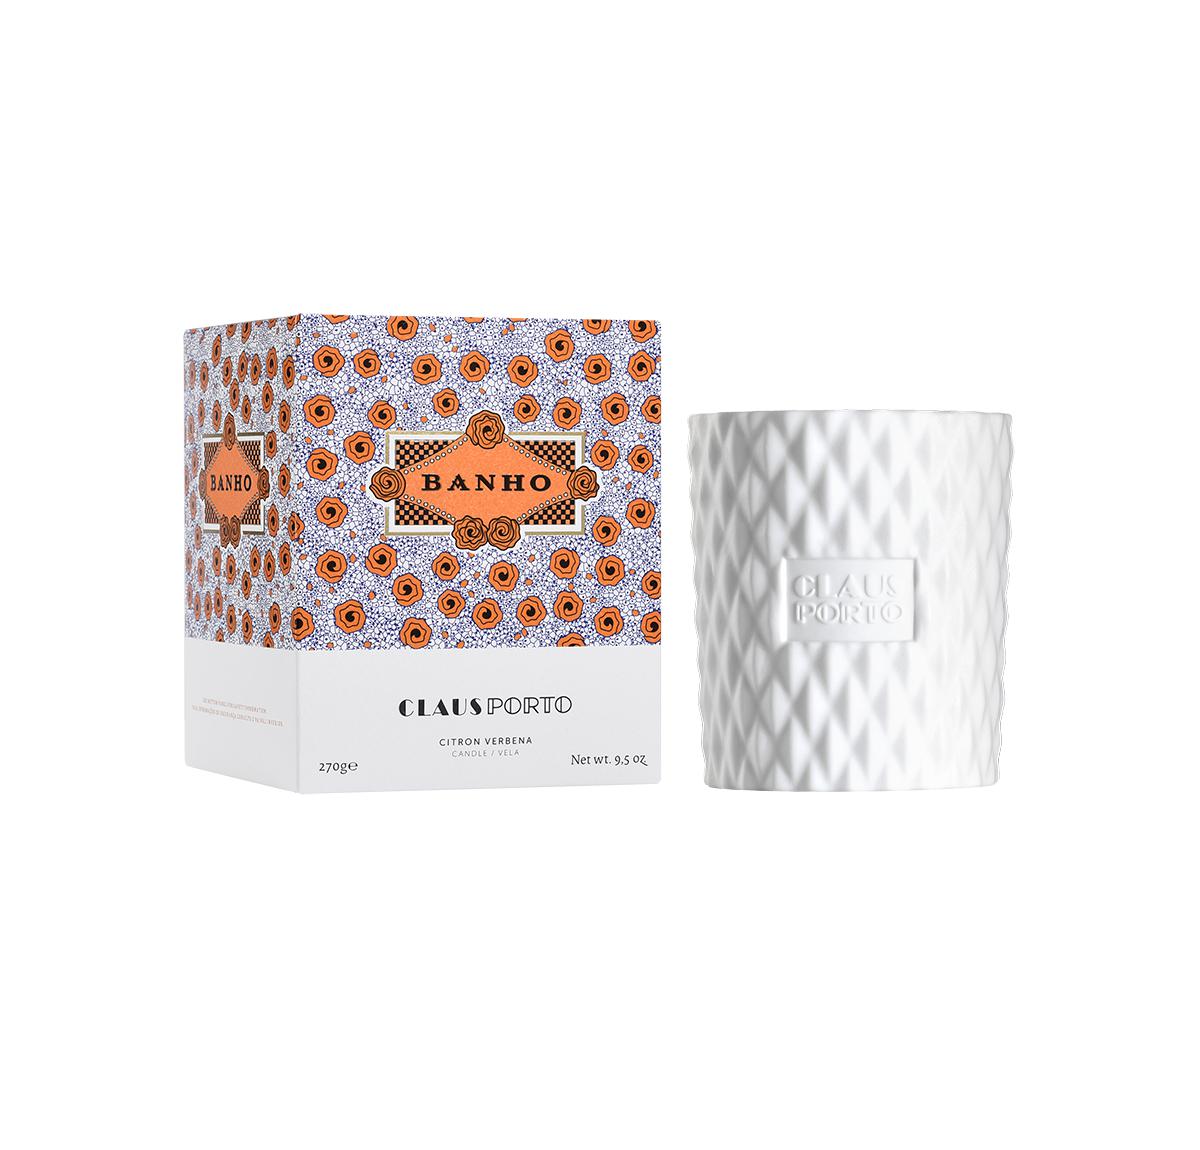 CLAUS PORTO BANHO CANDLE 270g BY CLAUS PORTO - MeMeMe Gifts